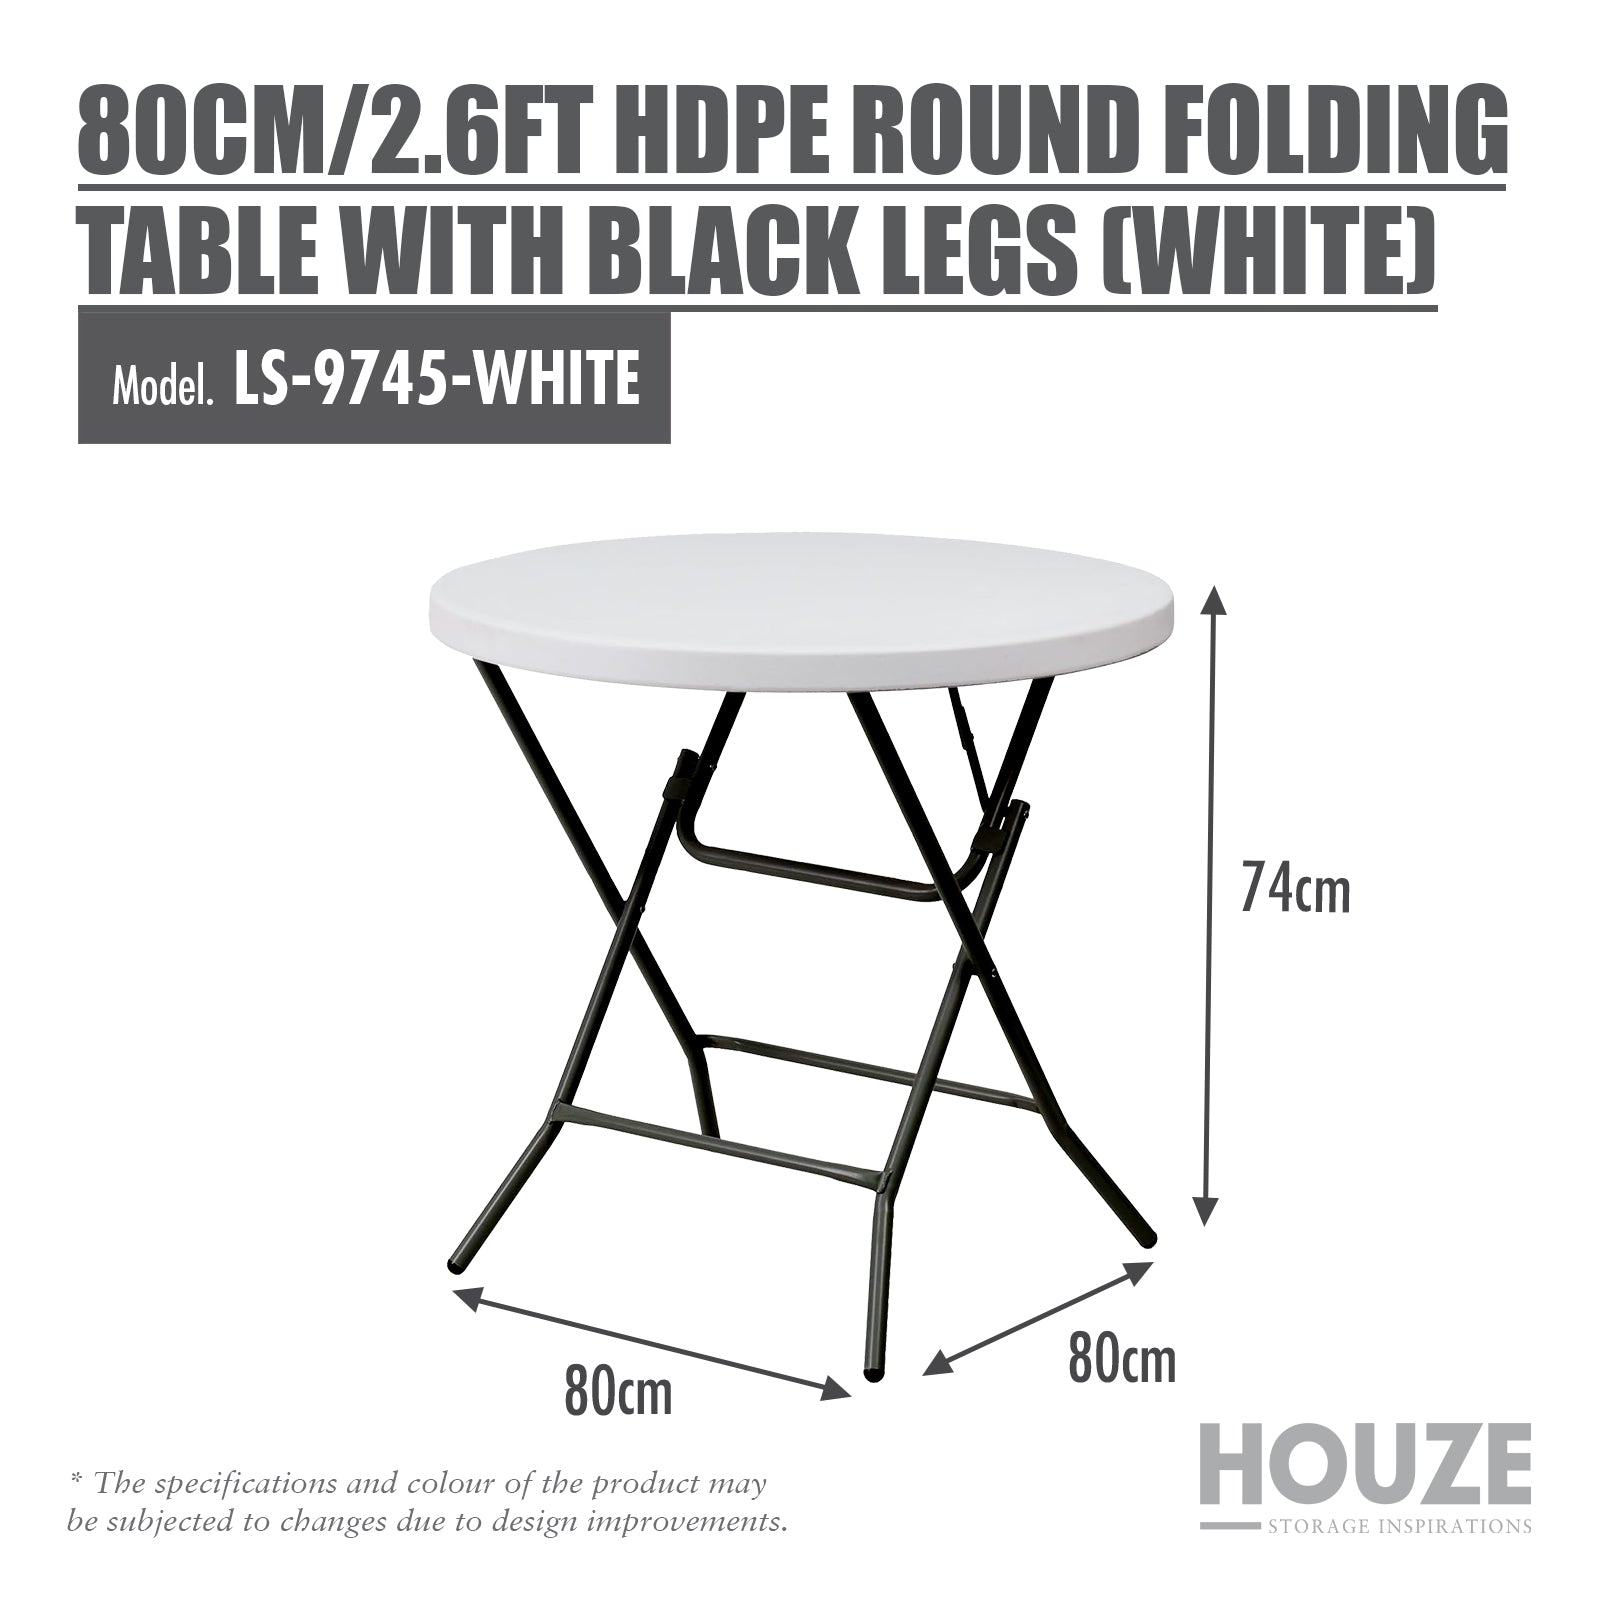 80cm/2.6ft - HDPE Round Folding Table with Black Legs (White)